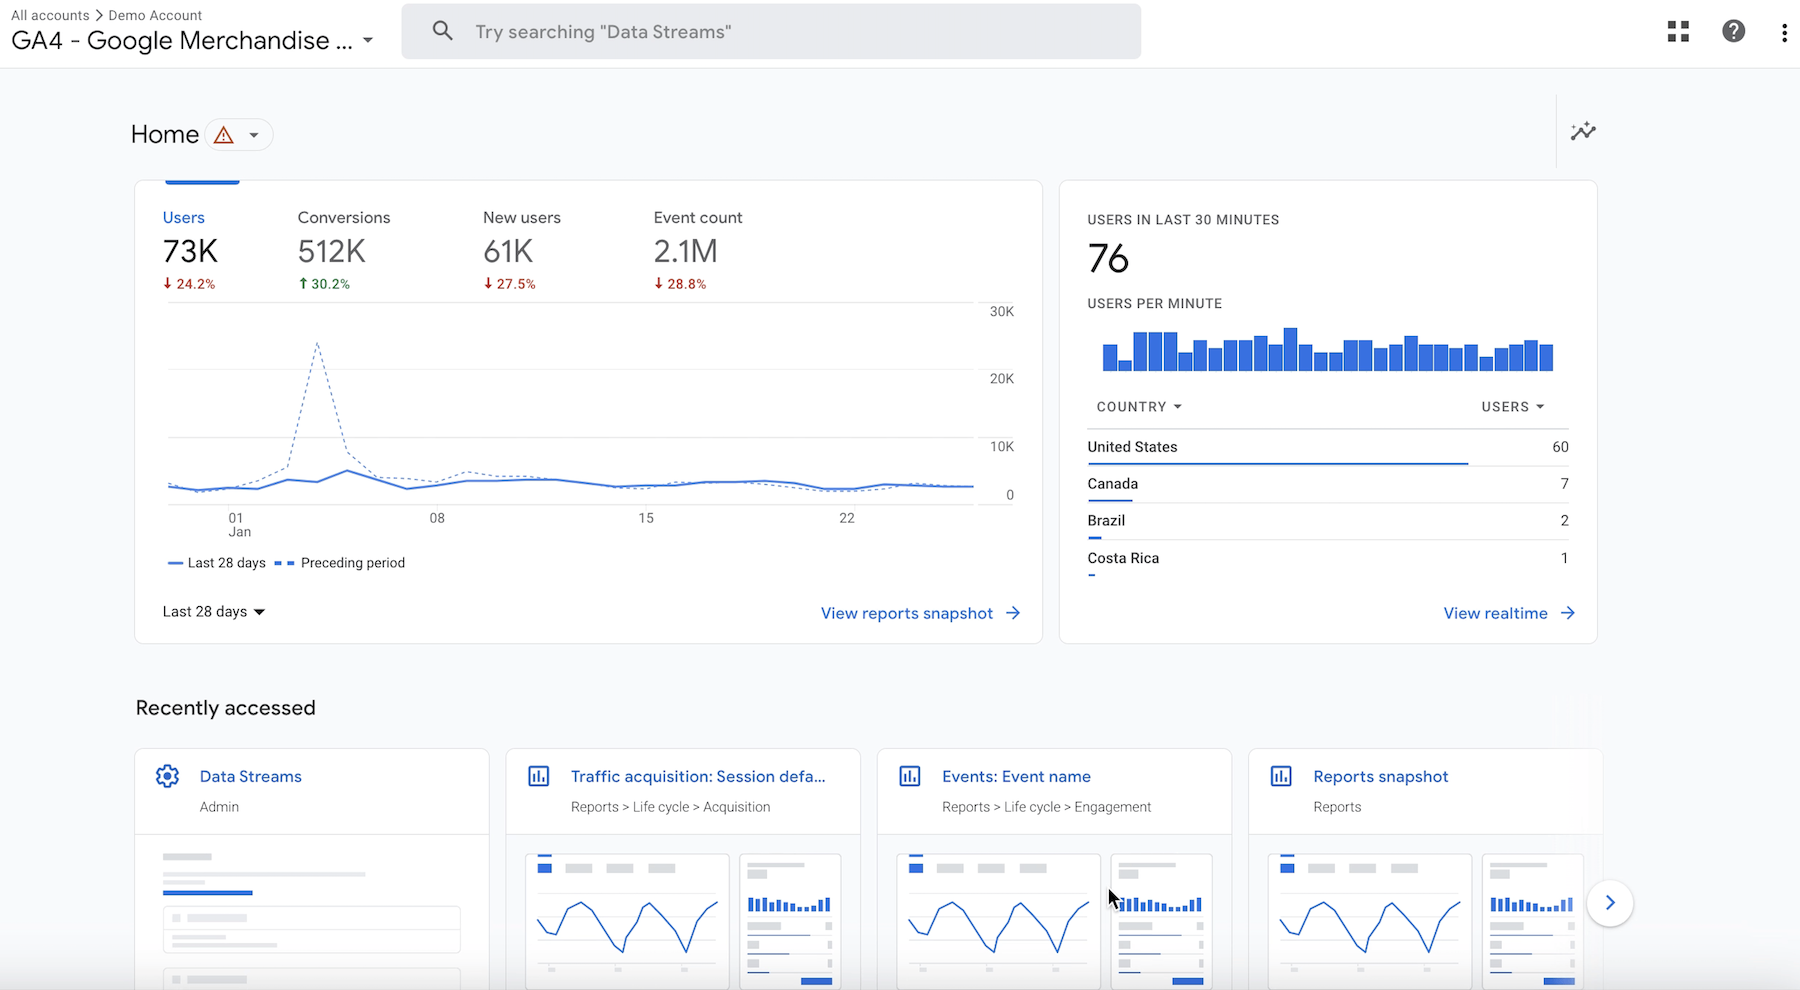 Google Analytics is an analytics tool that allows you to track traffic, user behavior and engagement